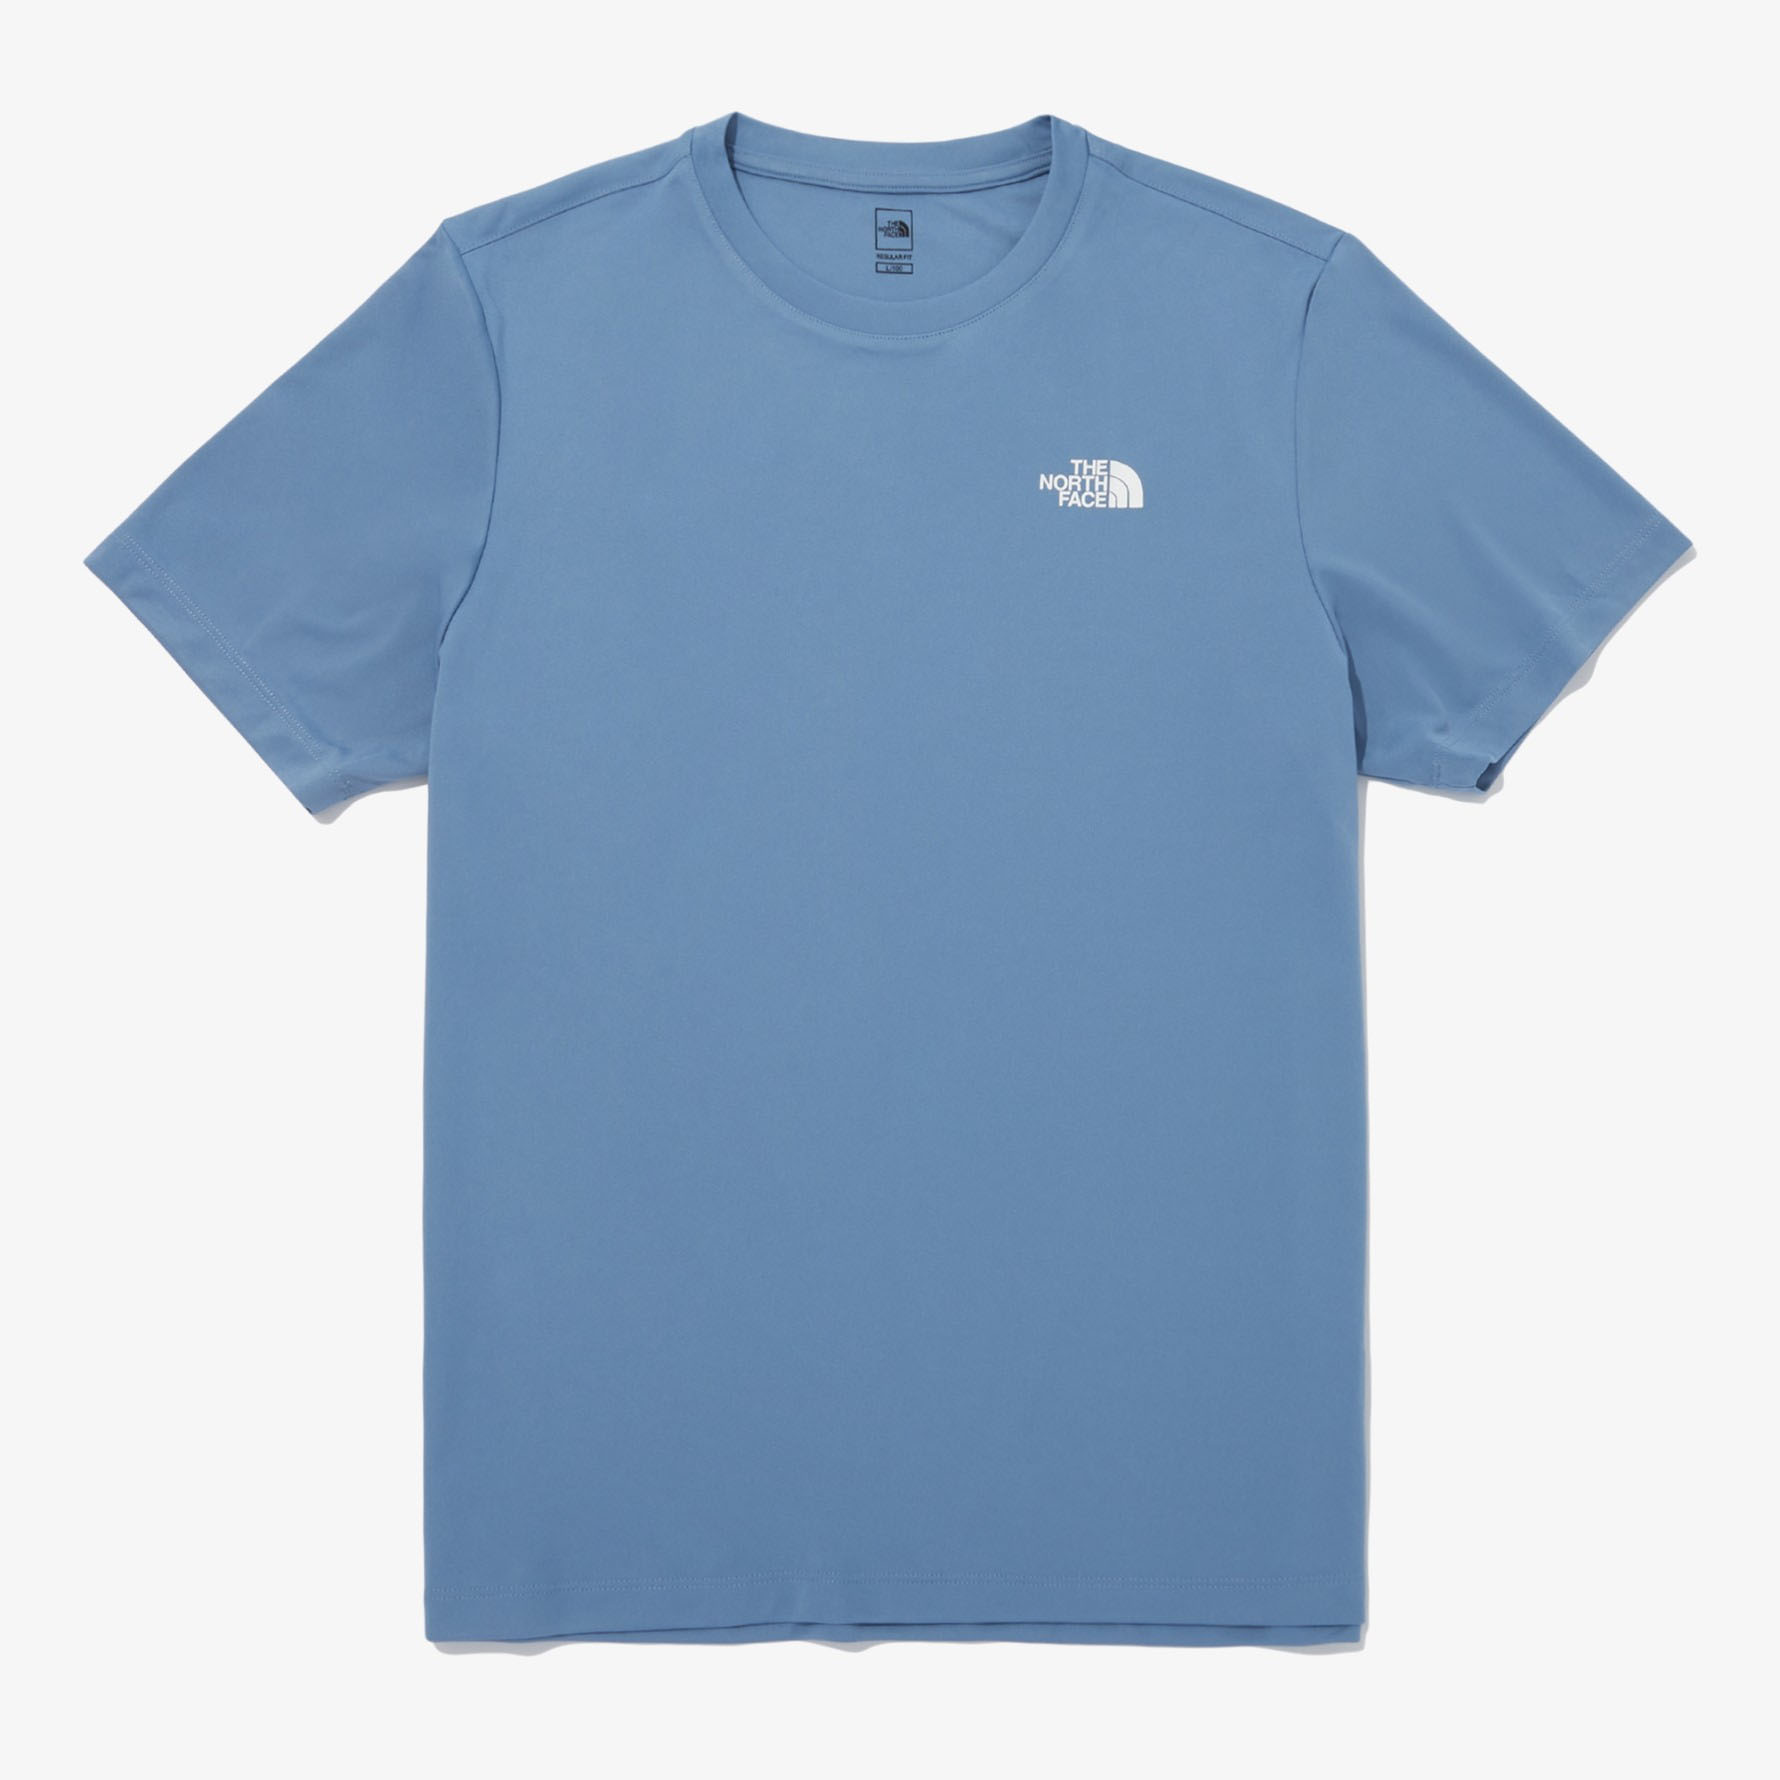 THE NORTH FACE Tシャツ M'S RECOVERY S/S R/TEE リカバリー 半袖Tシャツ ロゴT ベーシックフィット NAVY KHAKI CHARCOAL BLUE BLACK 半袖 NT7UQ06A/B/C/D/E｜a-dot｜05